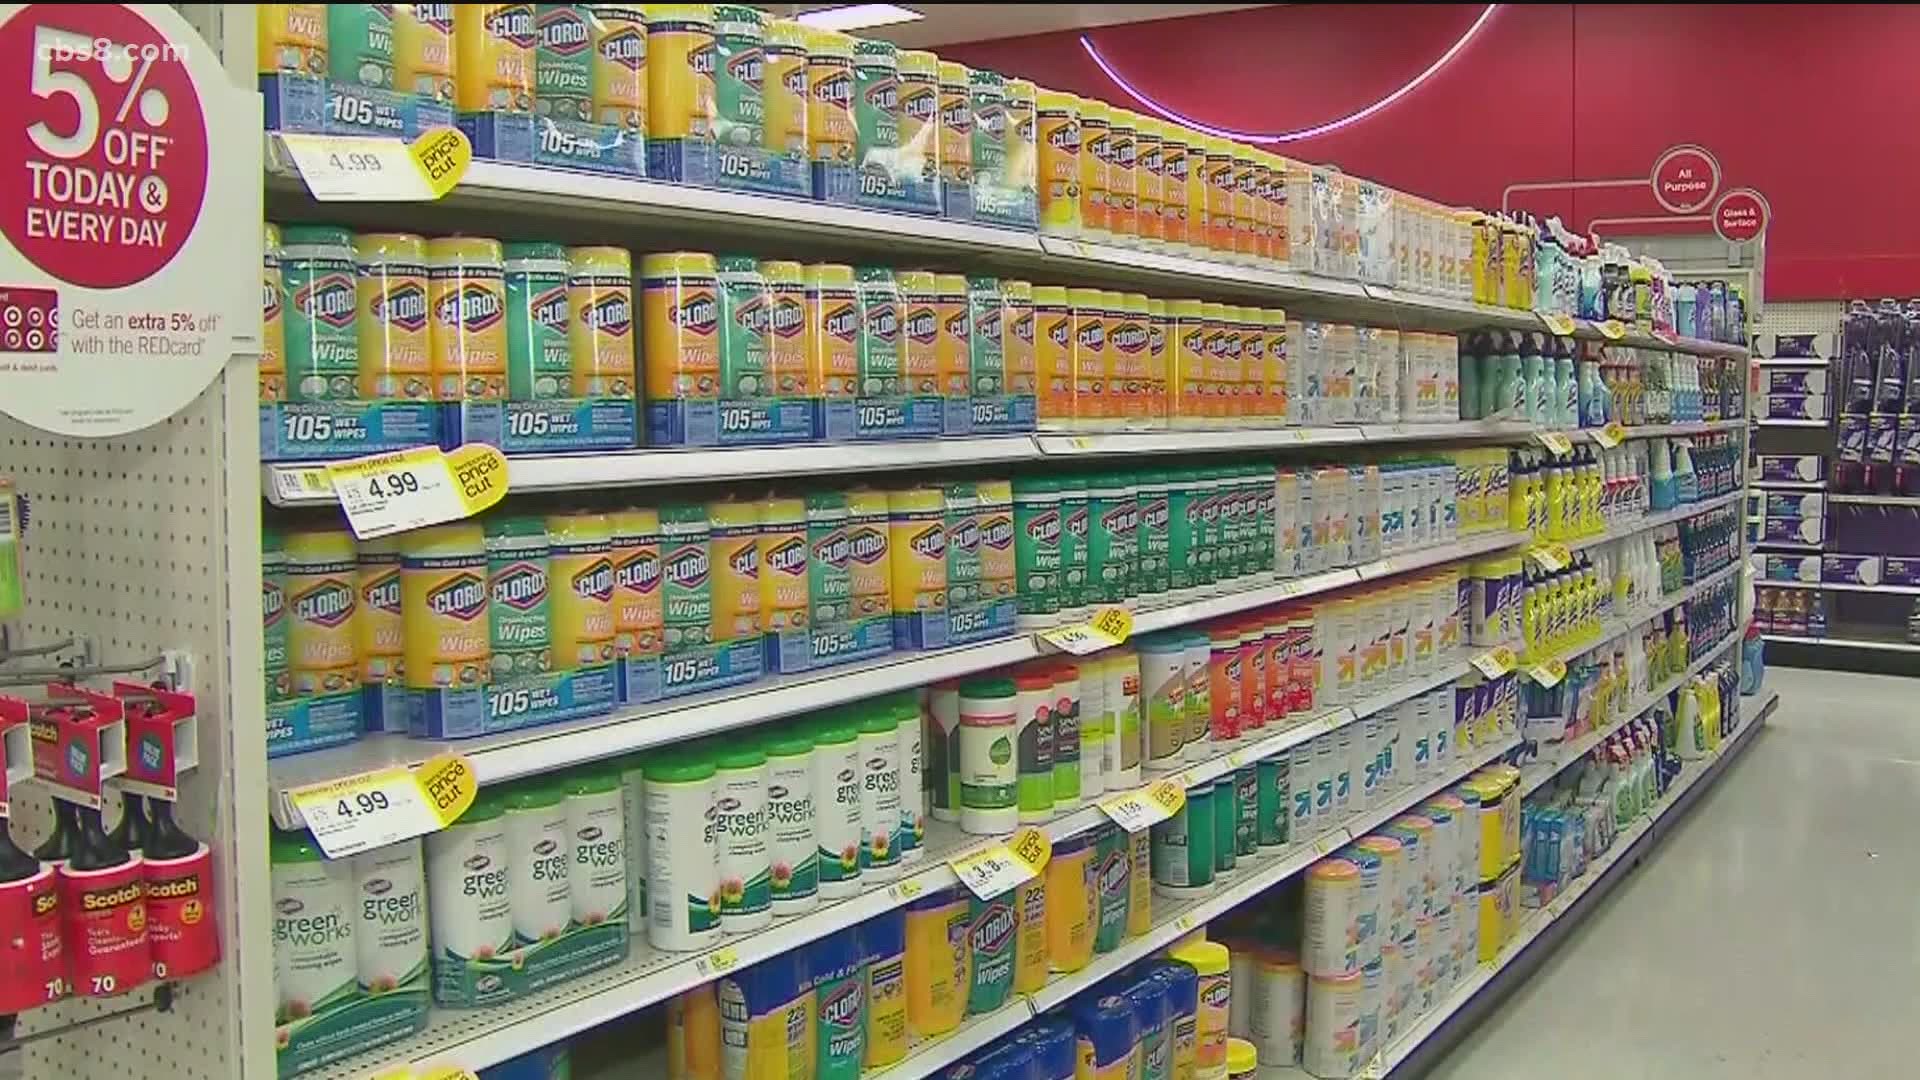 The CEO of Clorox said disinfecting wipes likely won't be fully stocked until 2021.